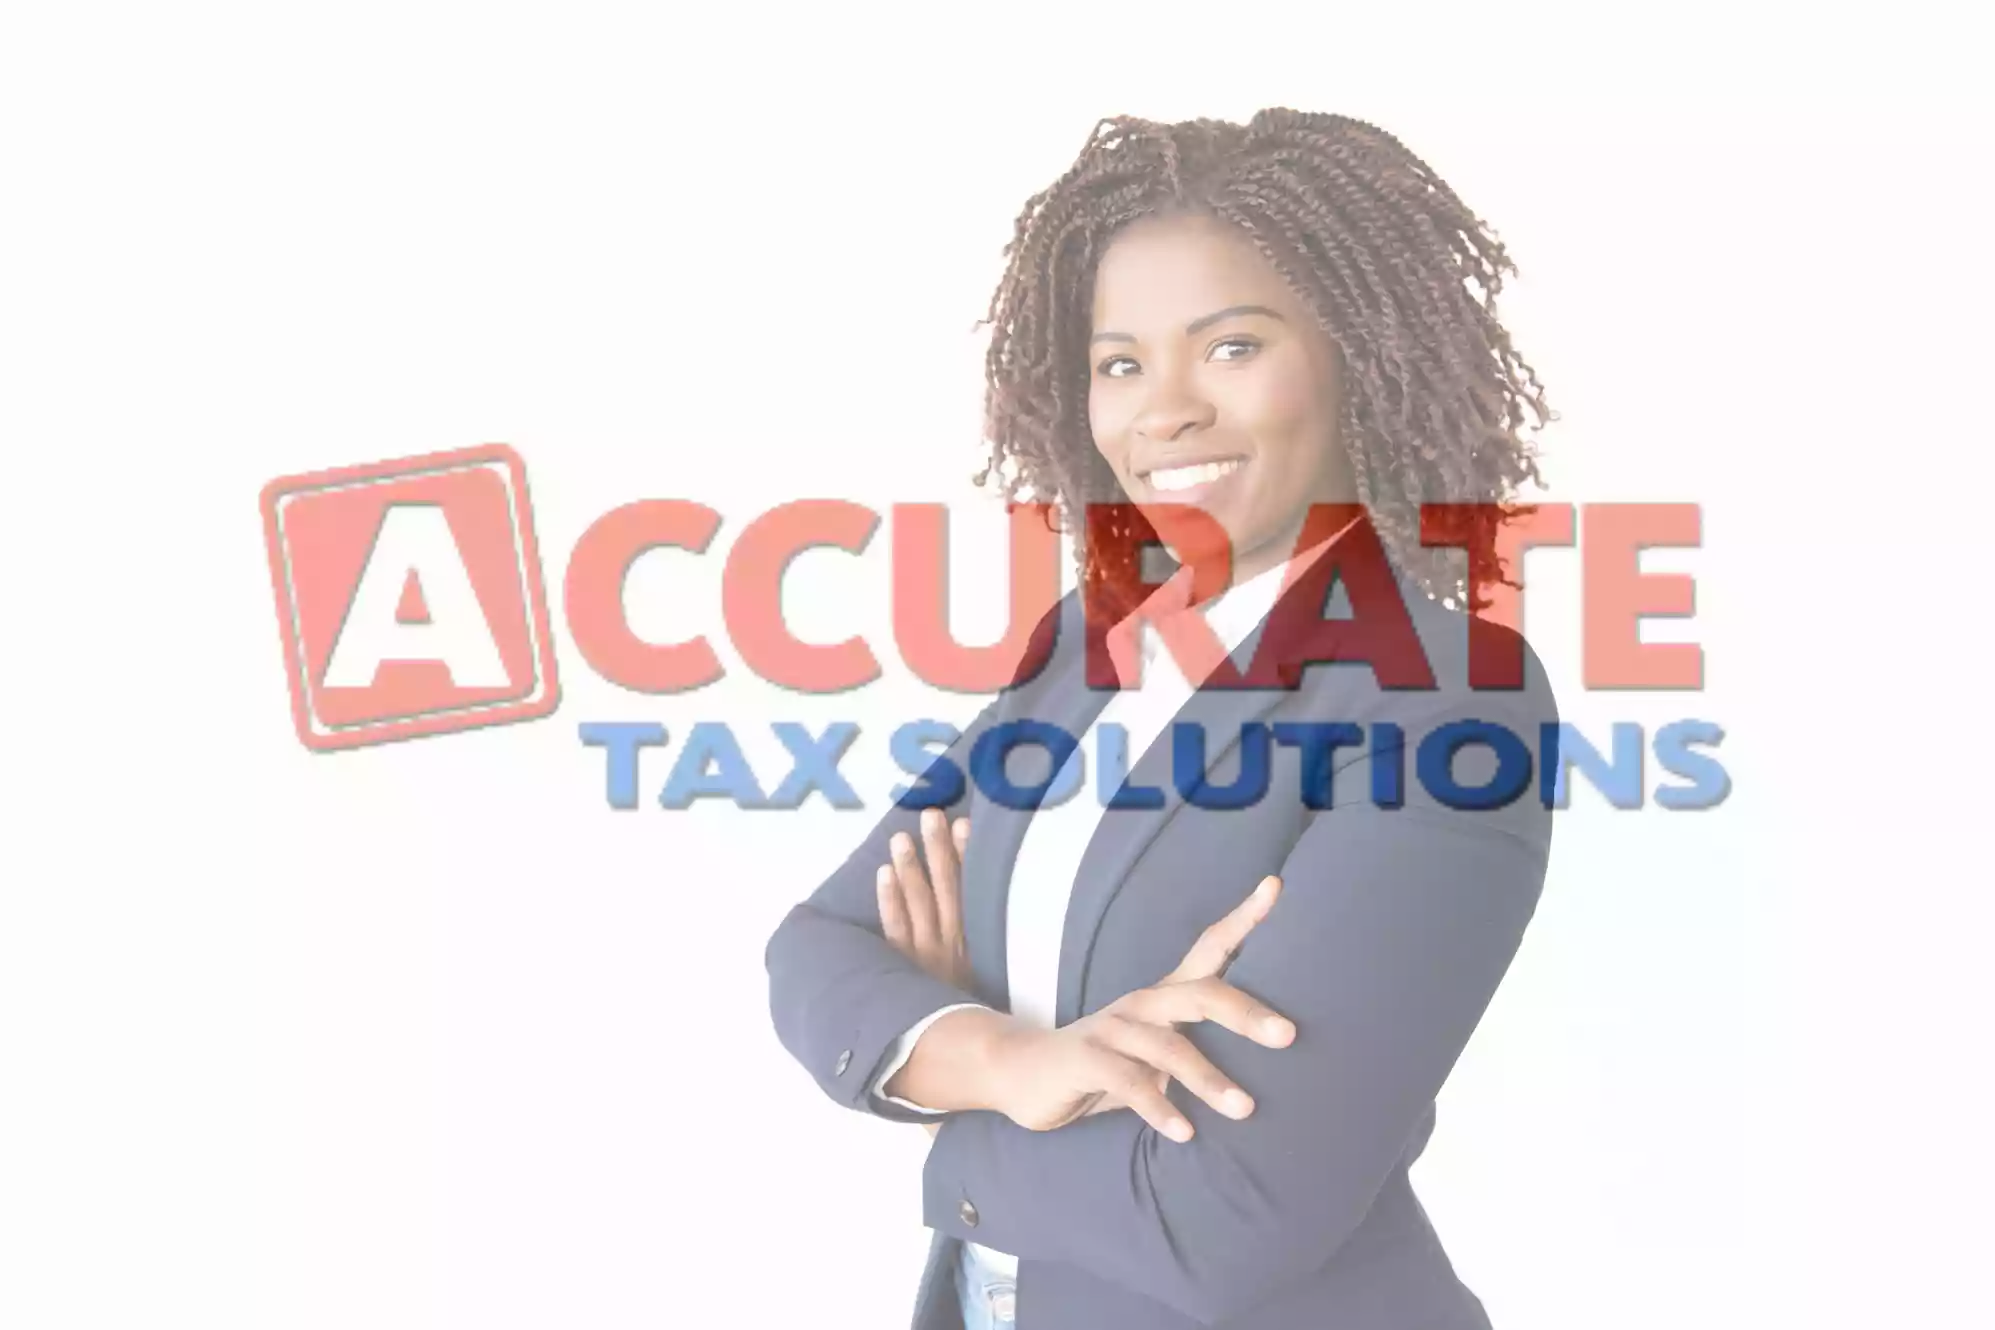 Accurate Tax Solutions LLC